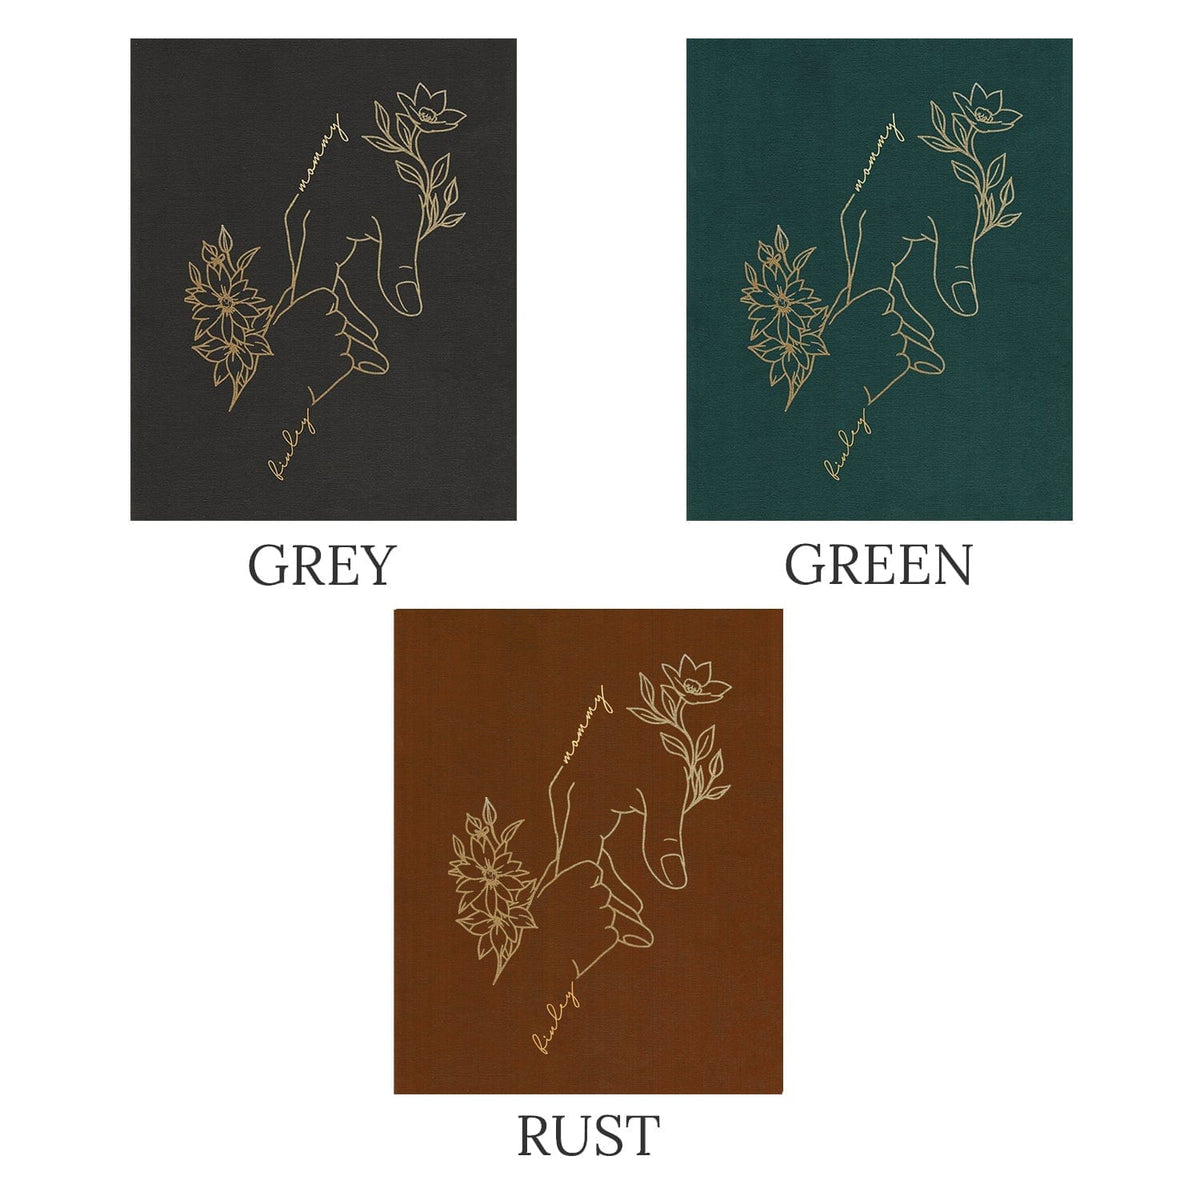 Available in a grey, green, or rust color backdrop with gold pen stroke